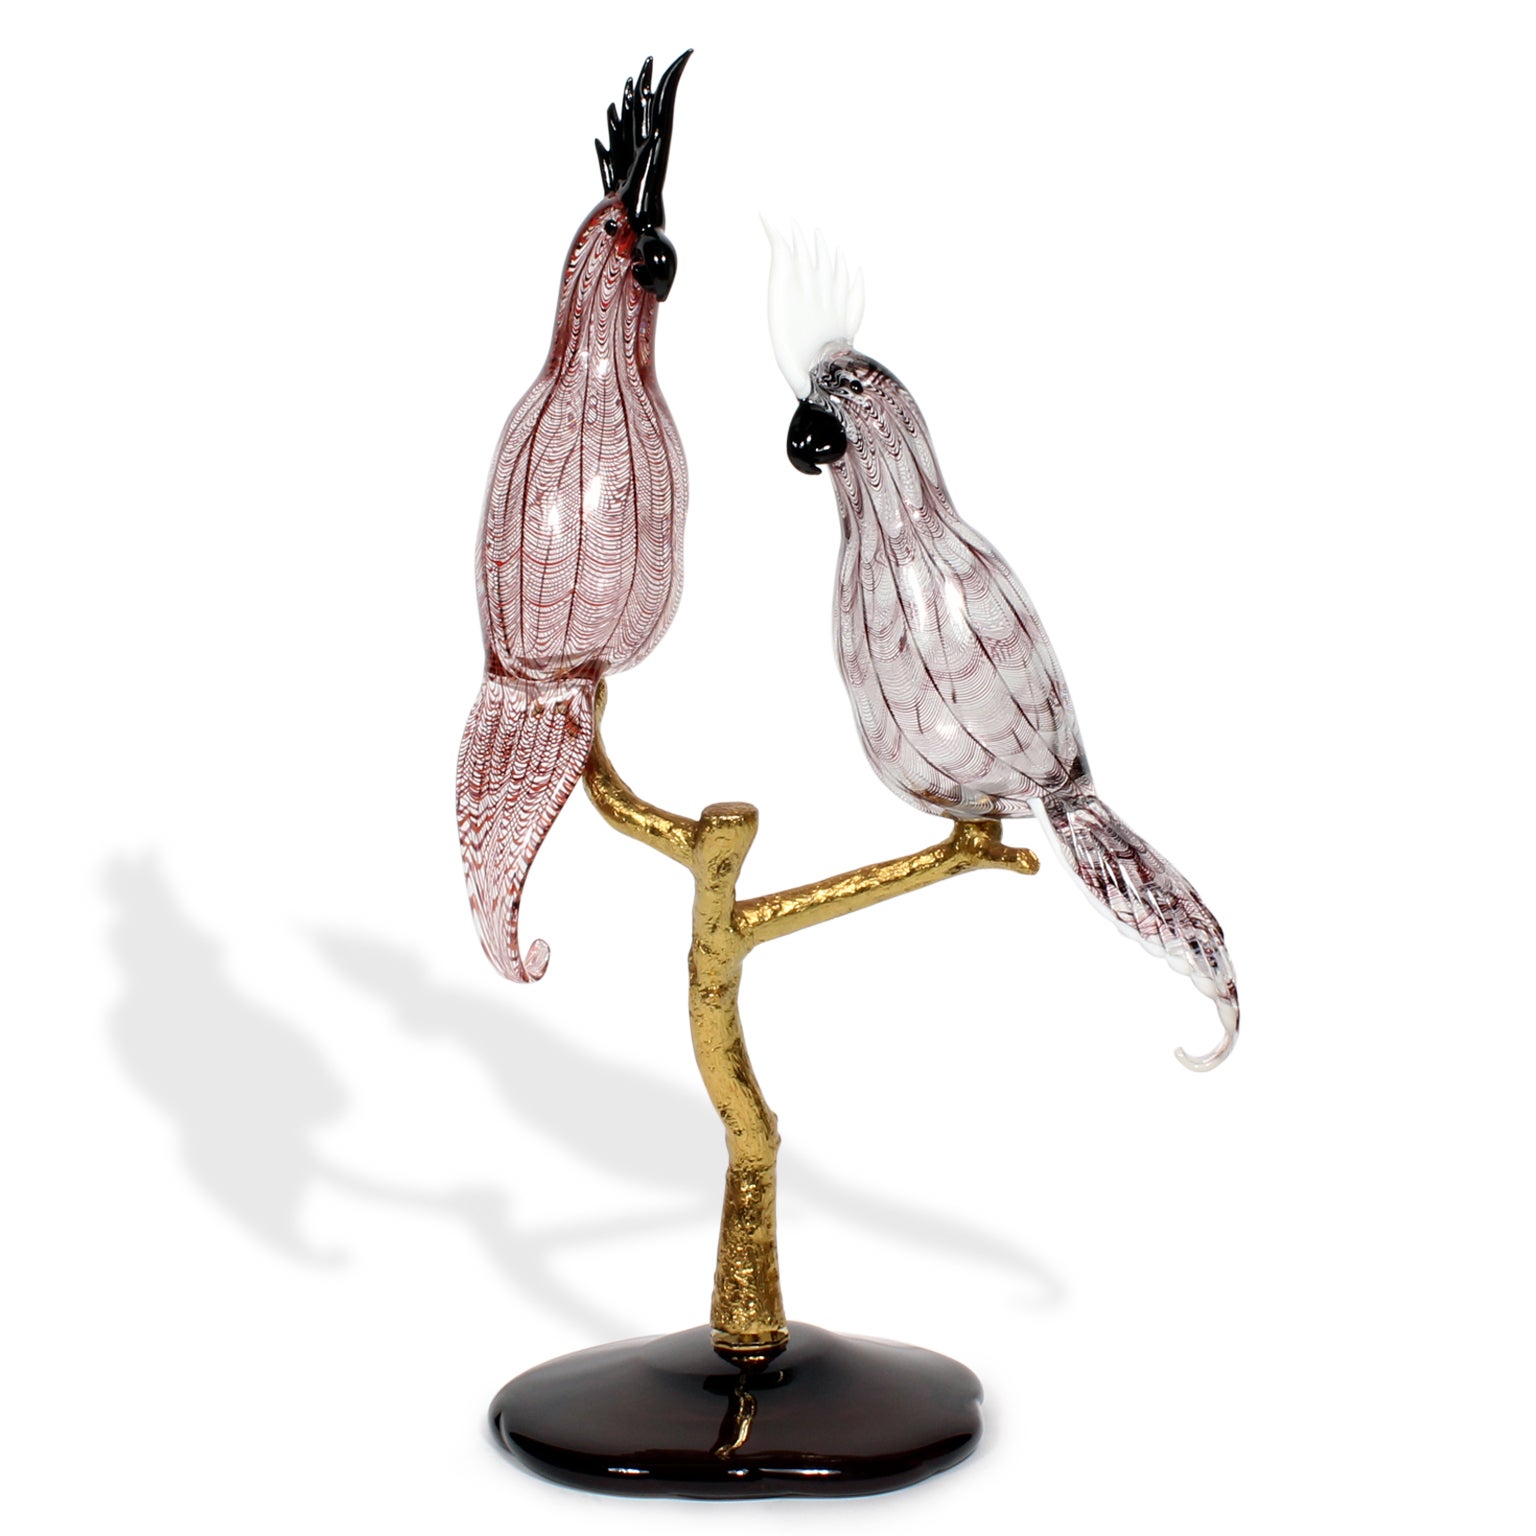 Glass Murano Style Parrots by Zanetti on Stand